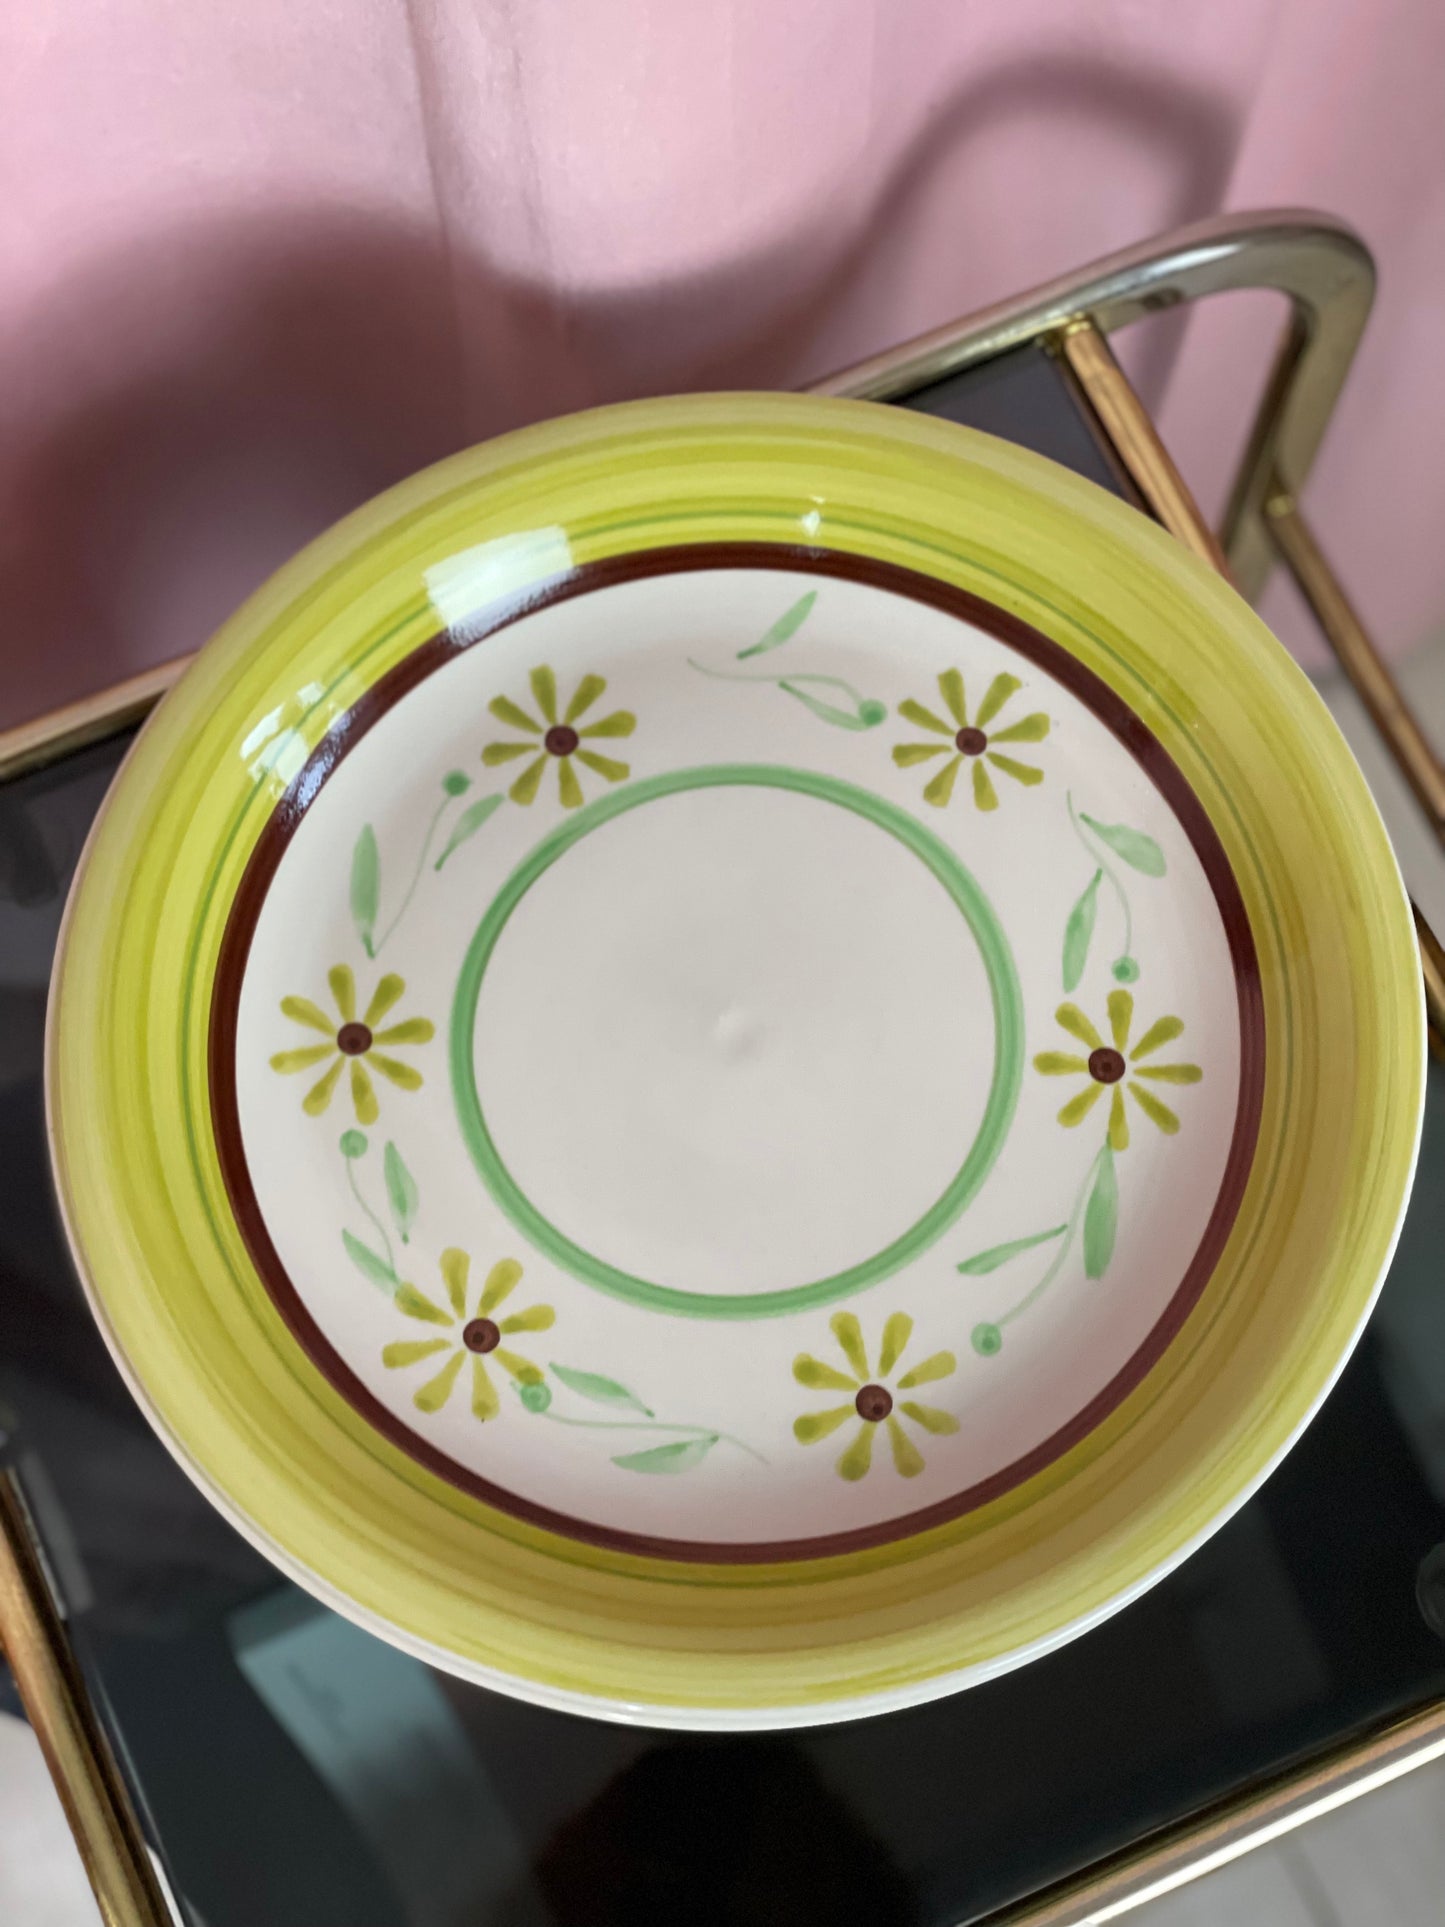 Dinner plates with flowers